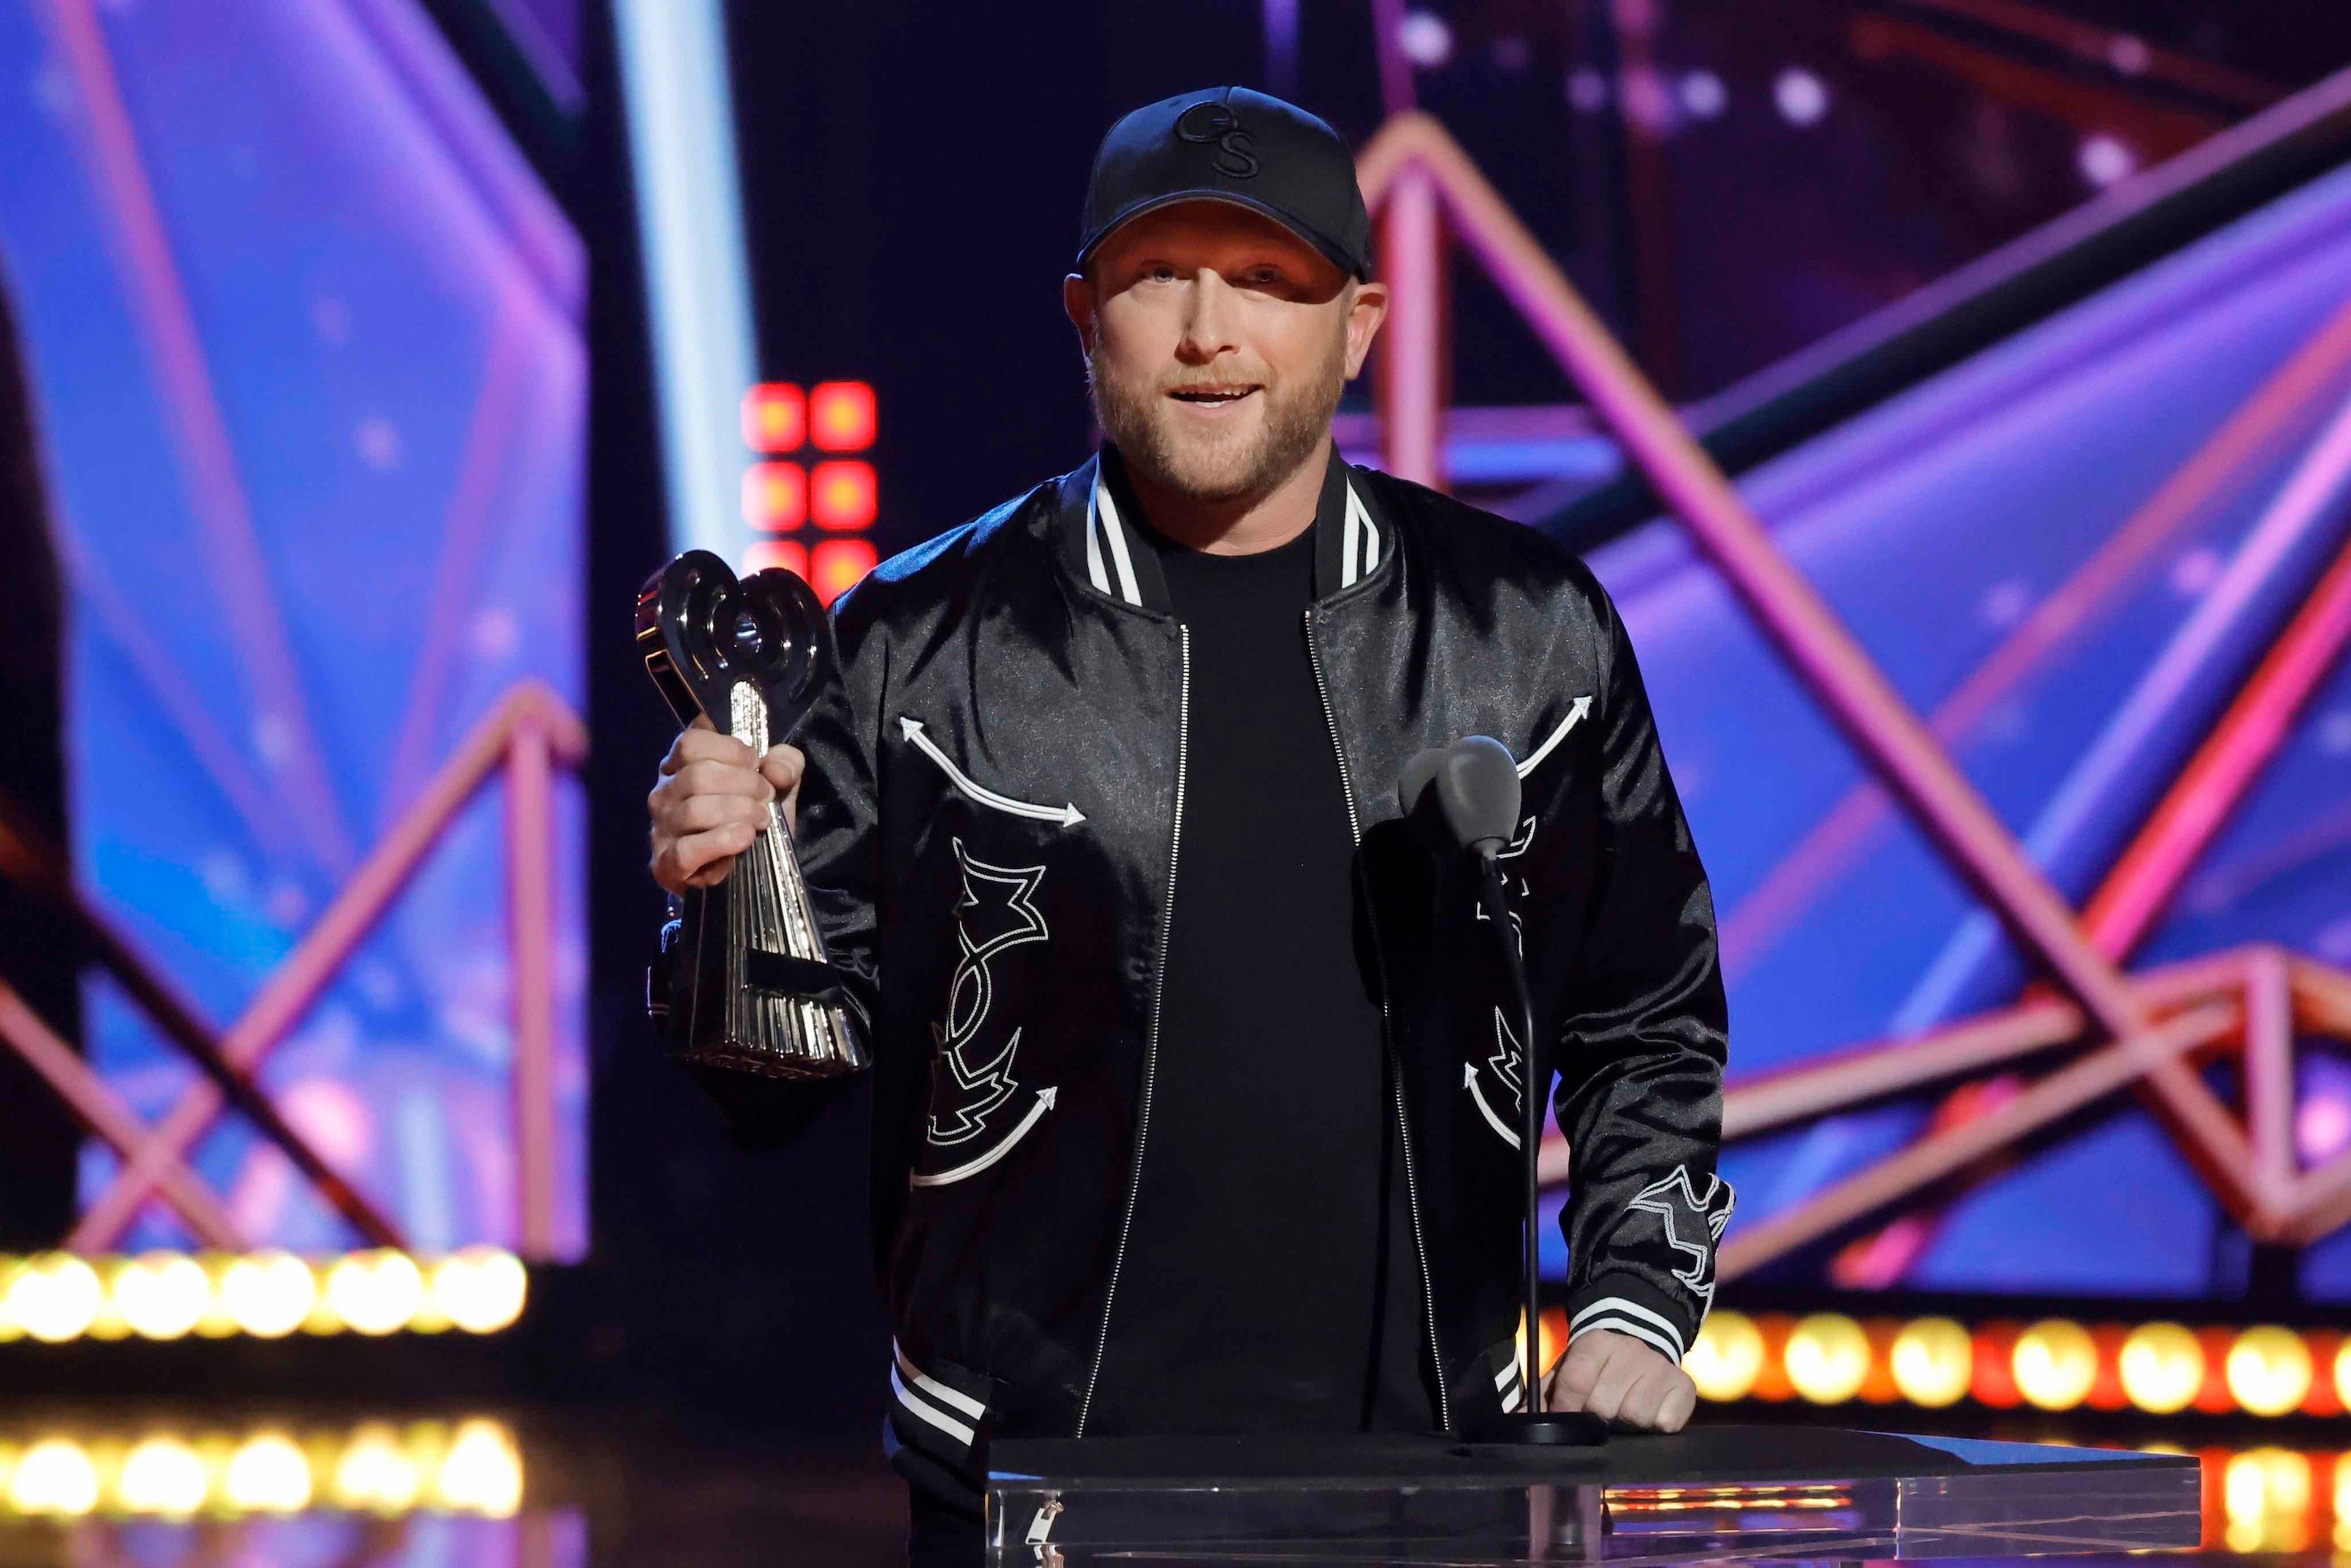 Cole Swindell Wins Second Trophy of the Night for Single of the Year at